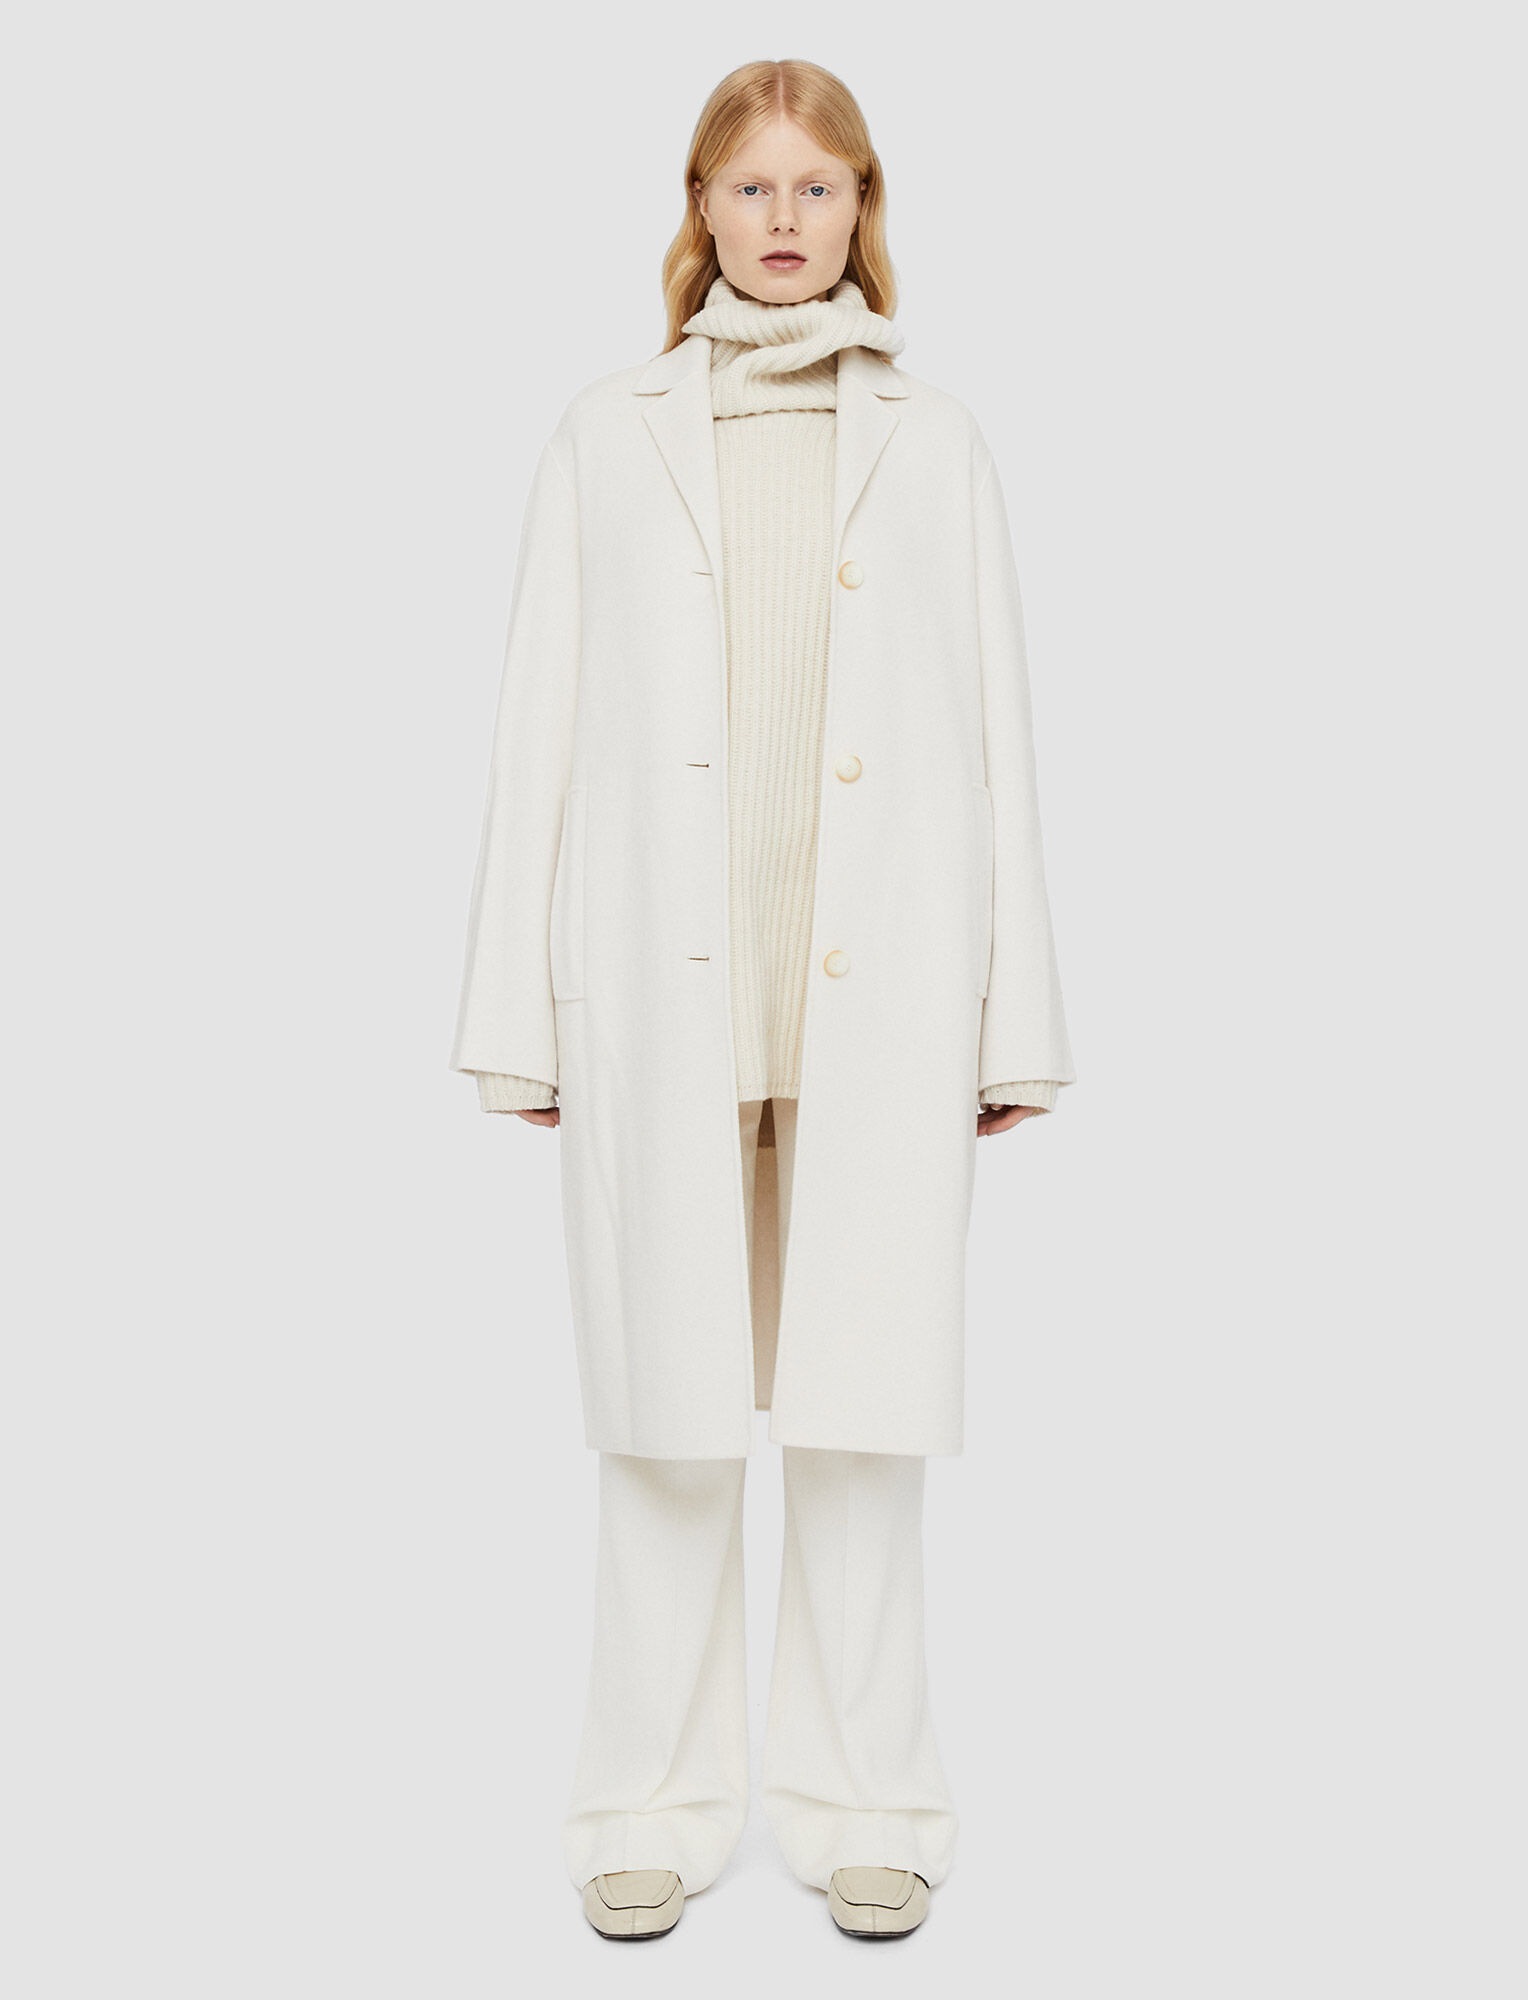 Joseph, Double Face Cashmere Caia Coat, in Ivory